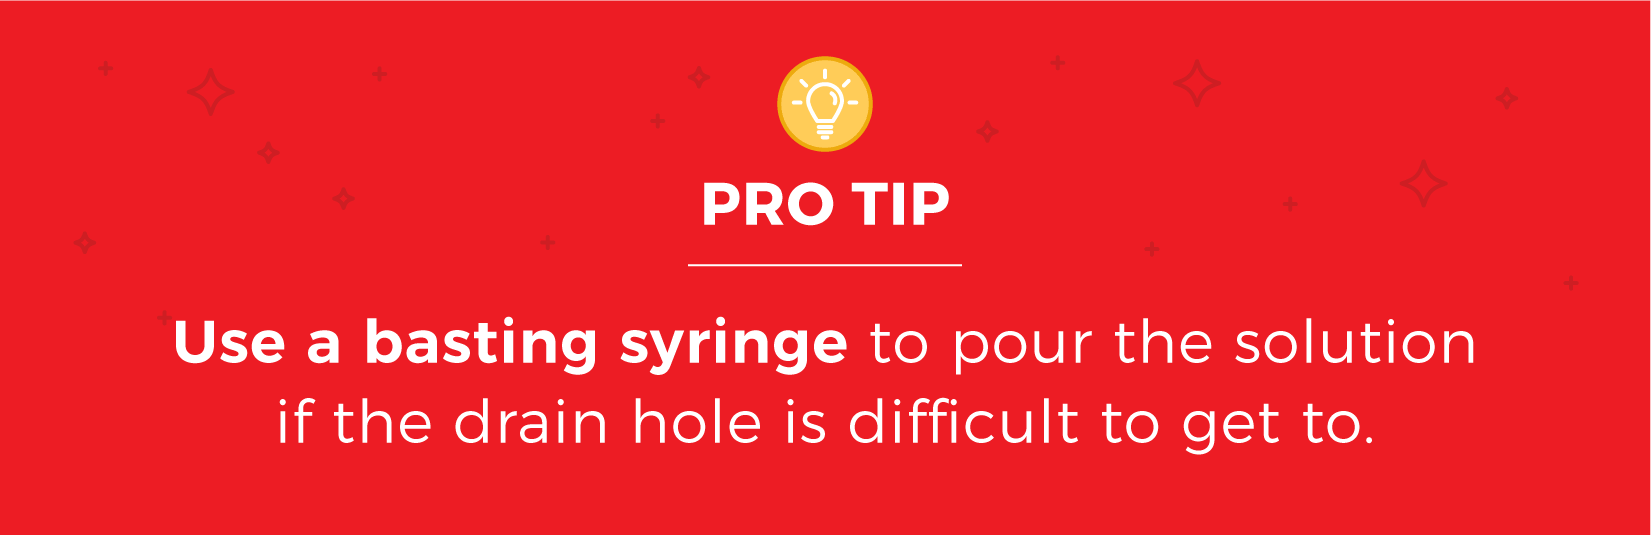 Image text reads: use a basting syringe to pour the solution if the drain hole is difficult to get to.